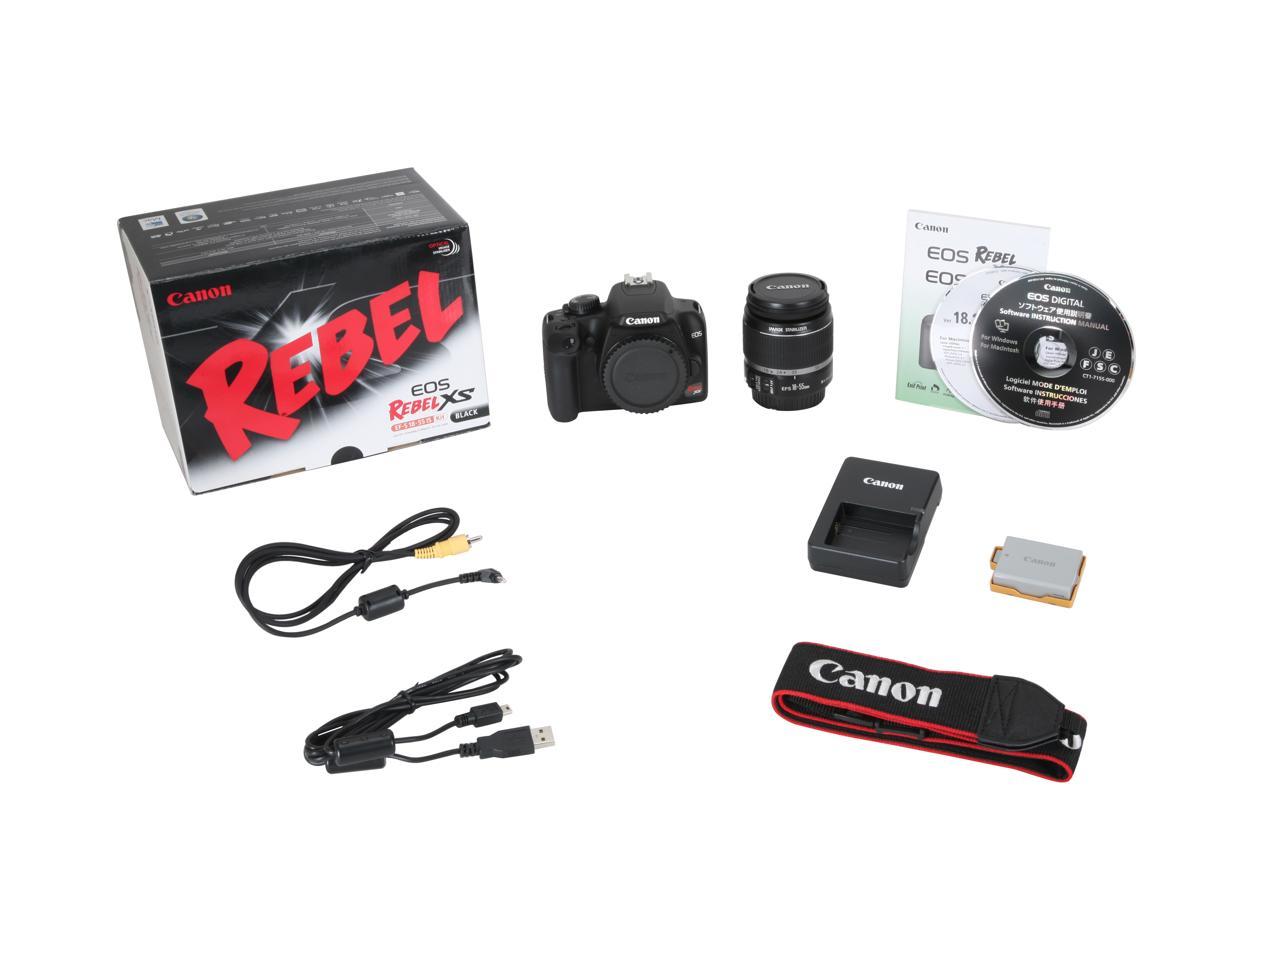 canon rebel xs review 2010